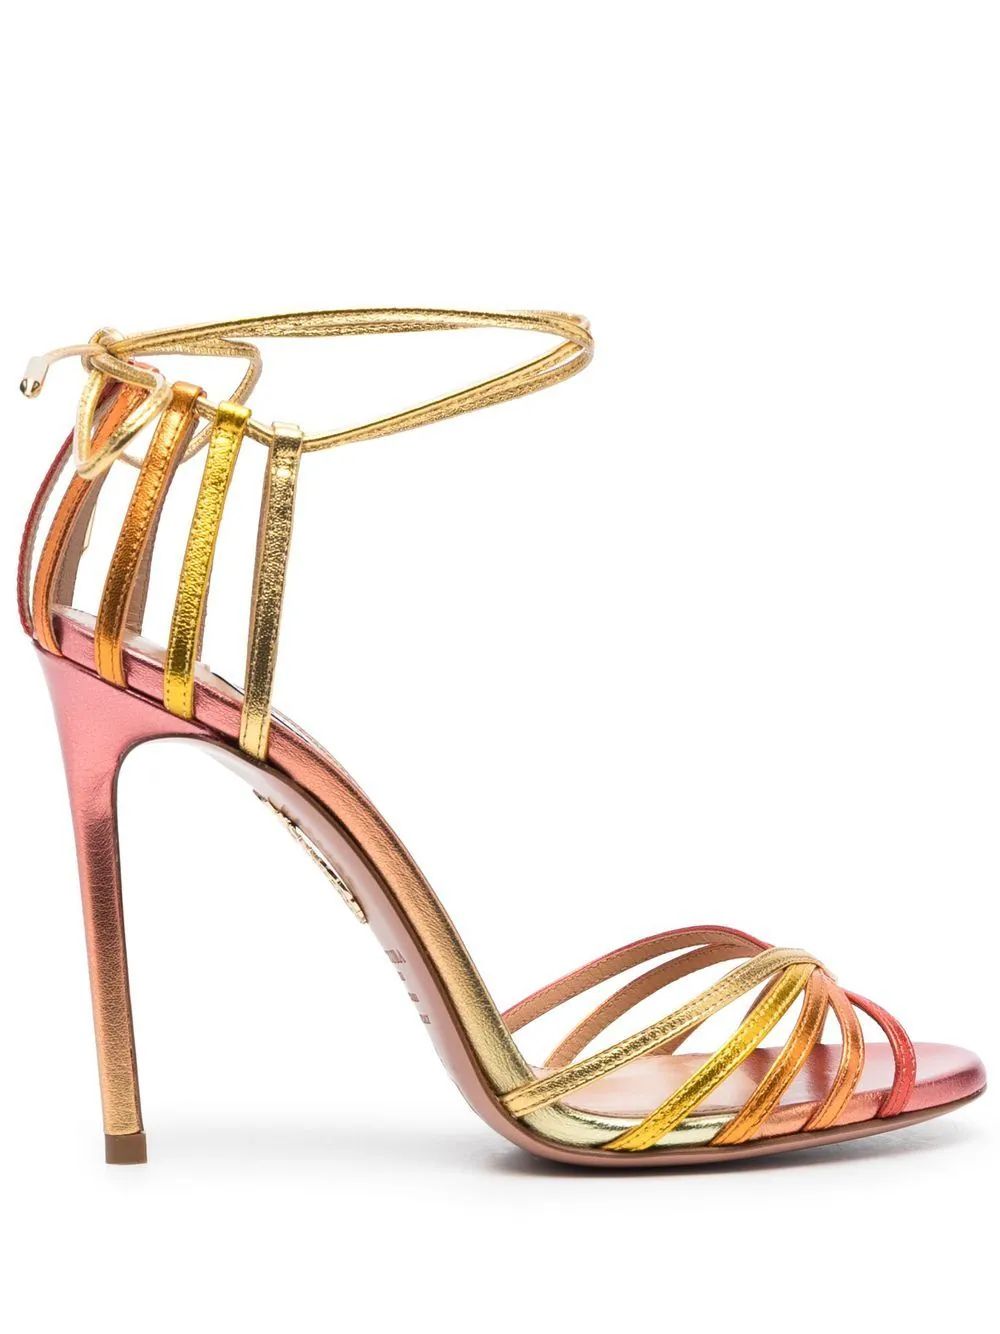 Straight To Heaven sandals | Farfetch Global